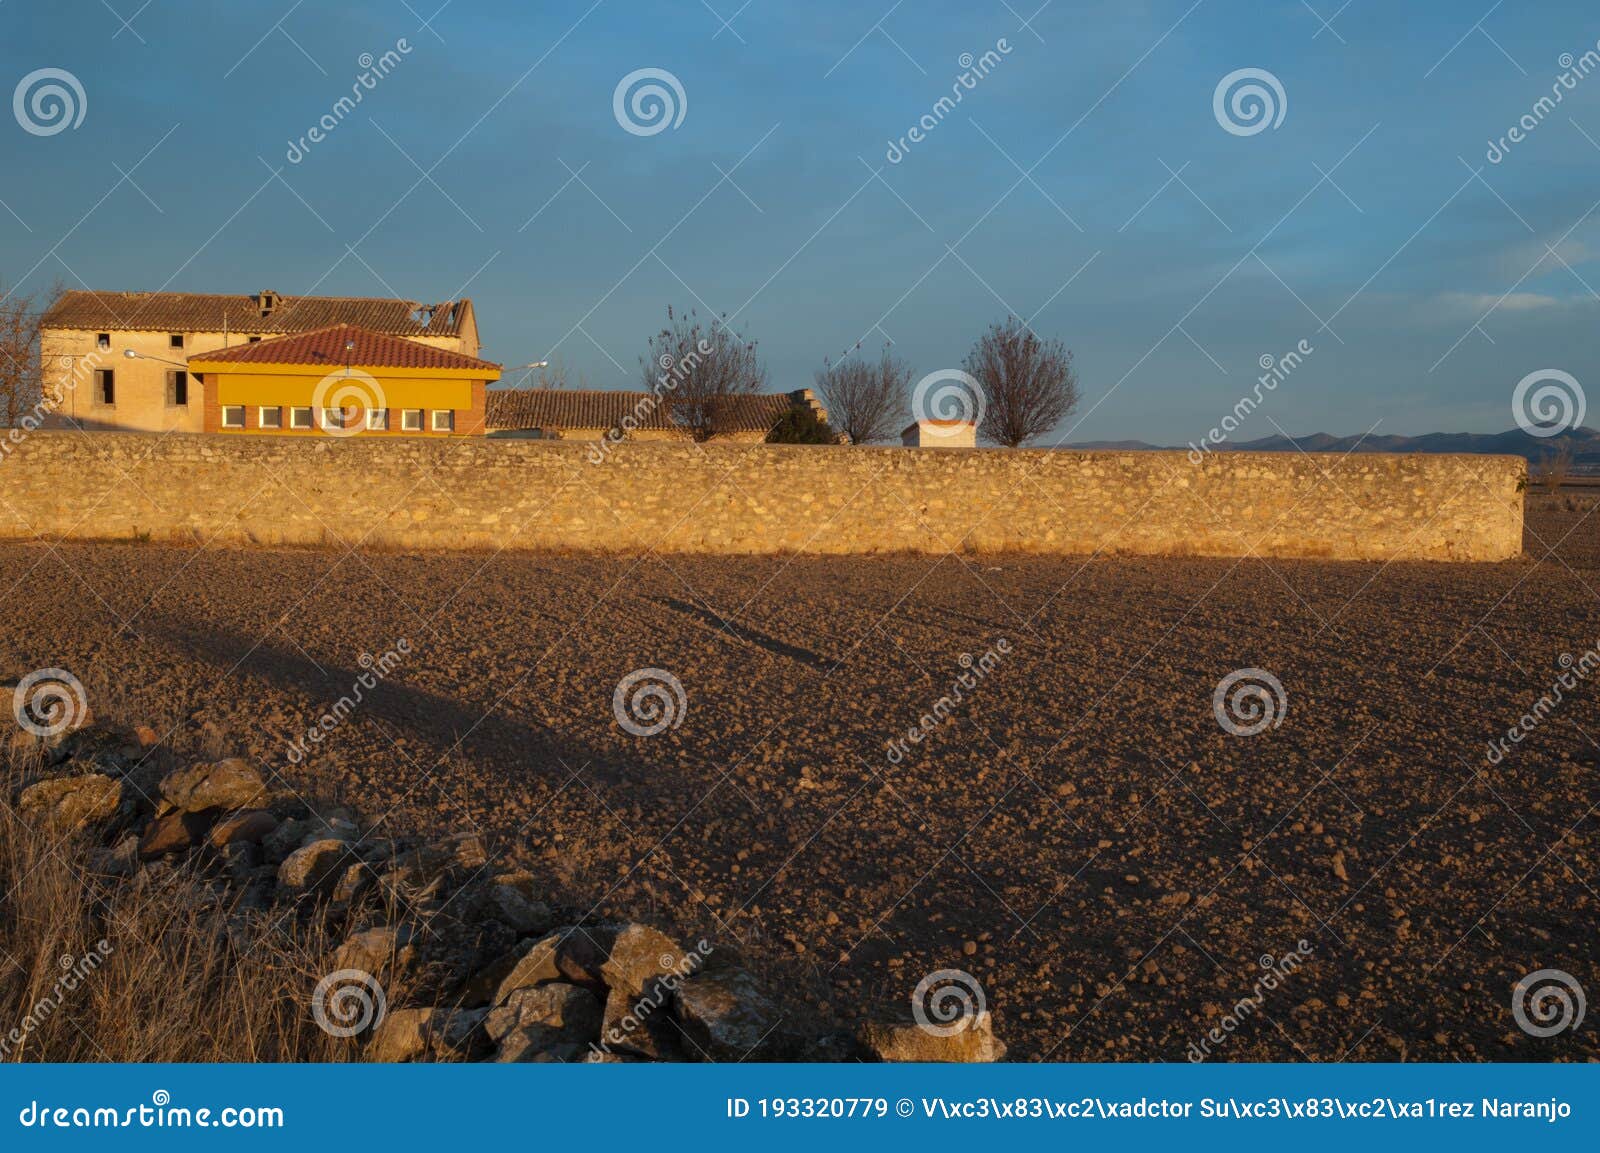 buildings and rural landscape in the village of bello.